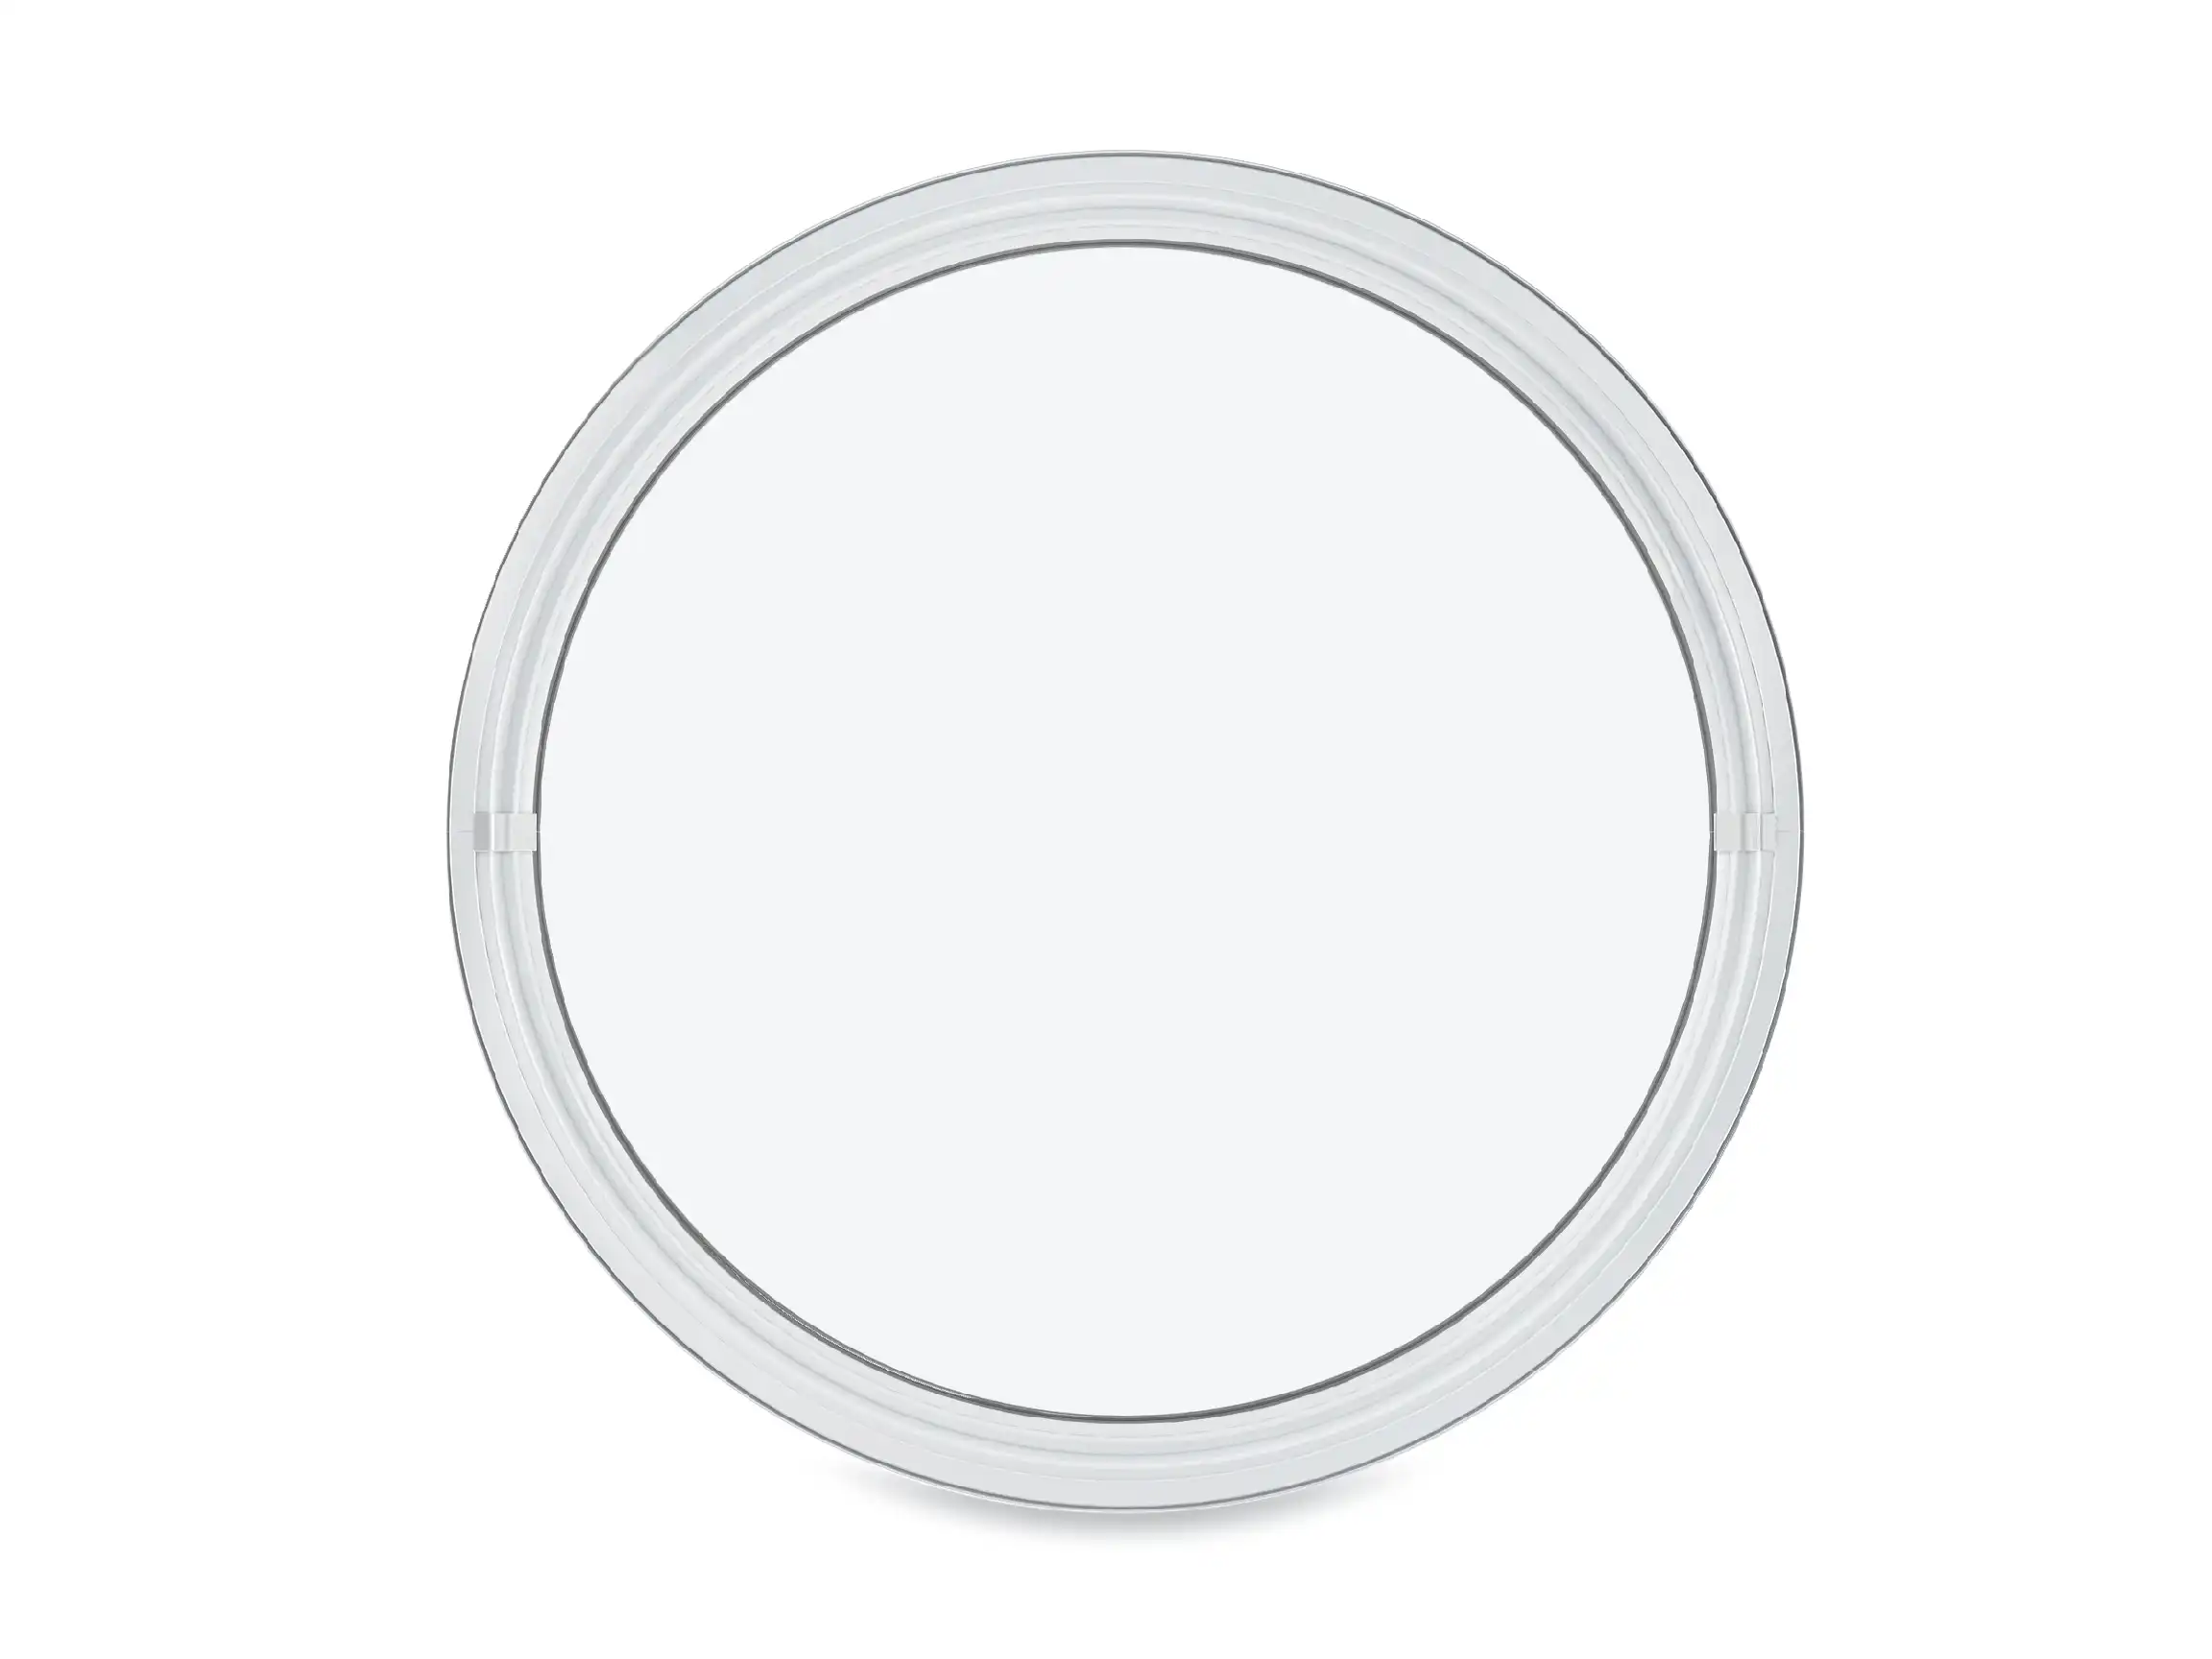 Image of a white Marvin Replacement Full Circle window.